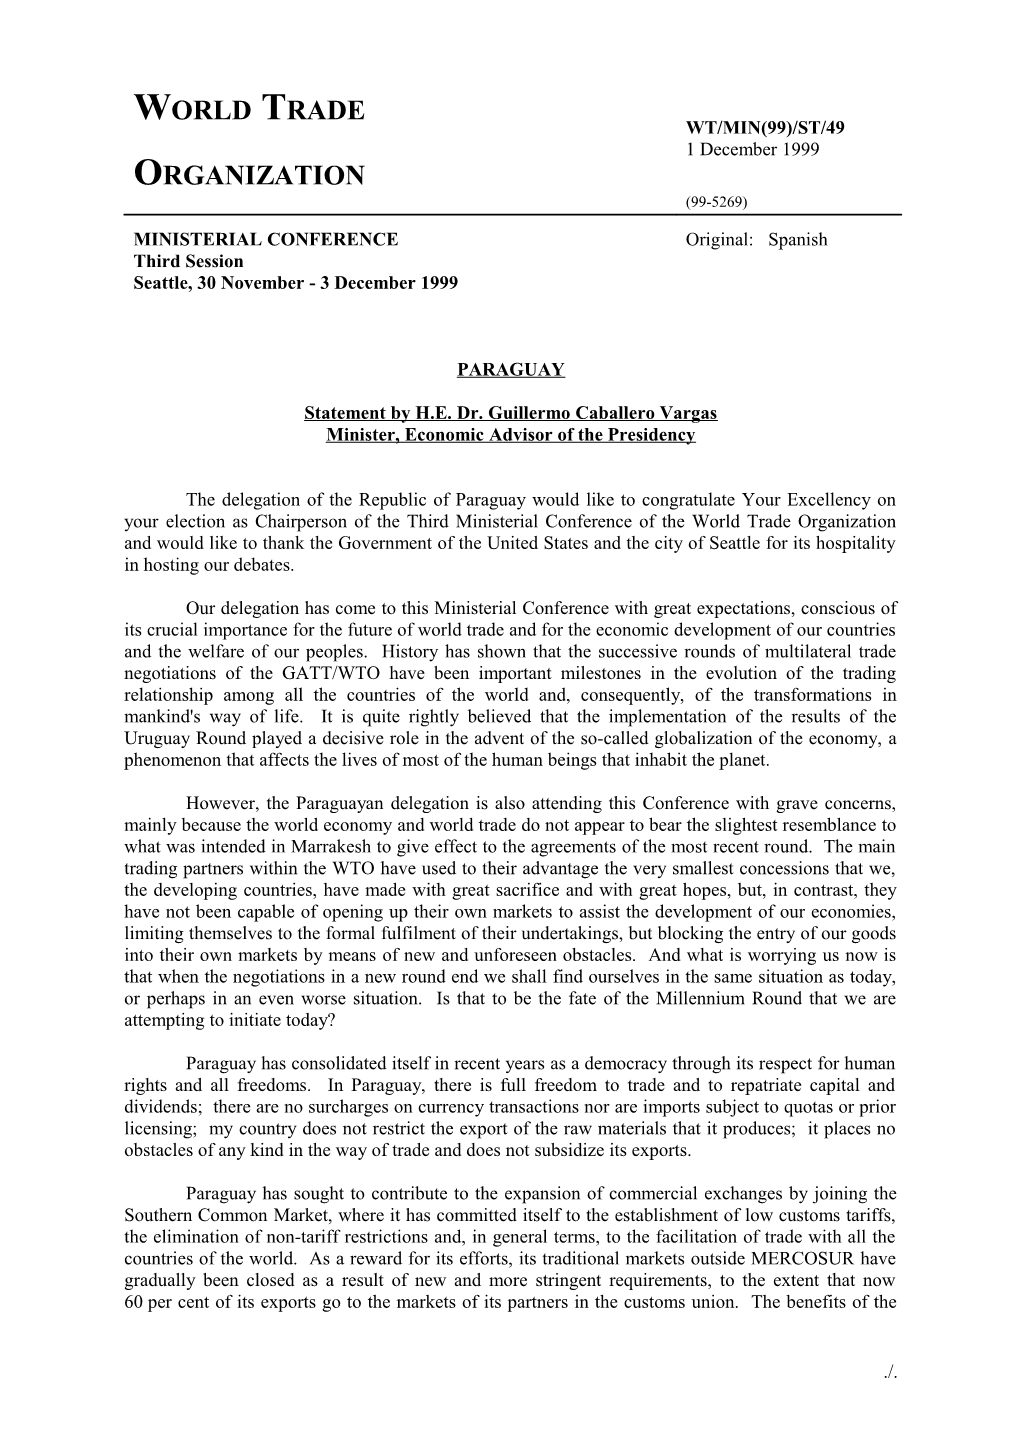 Statement by H.E. Dr. Guillermo Caballero Vargas